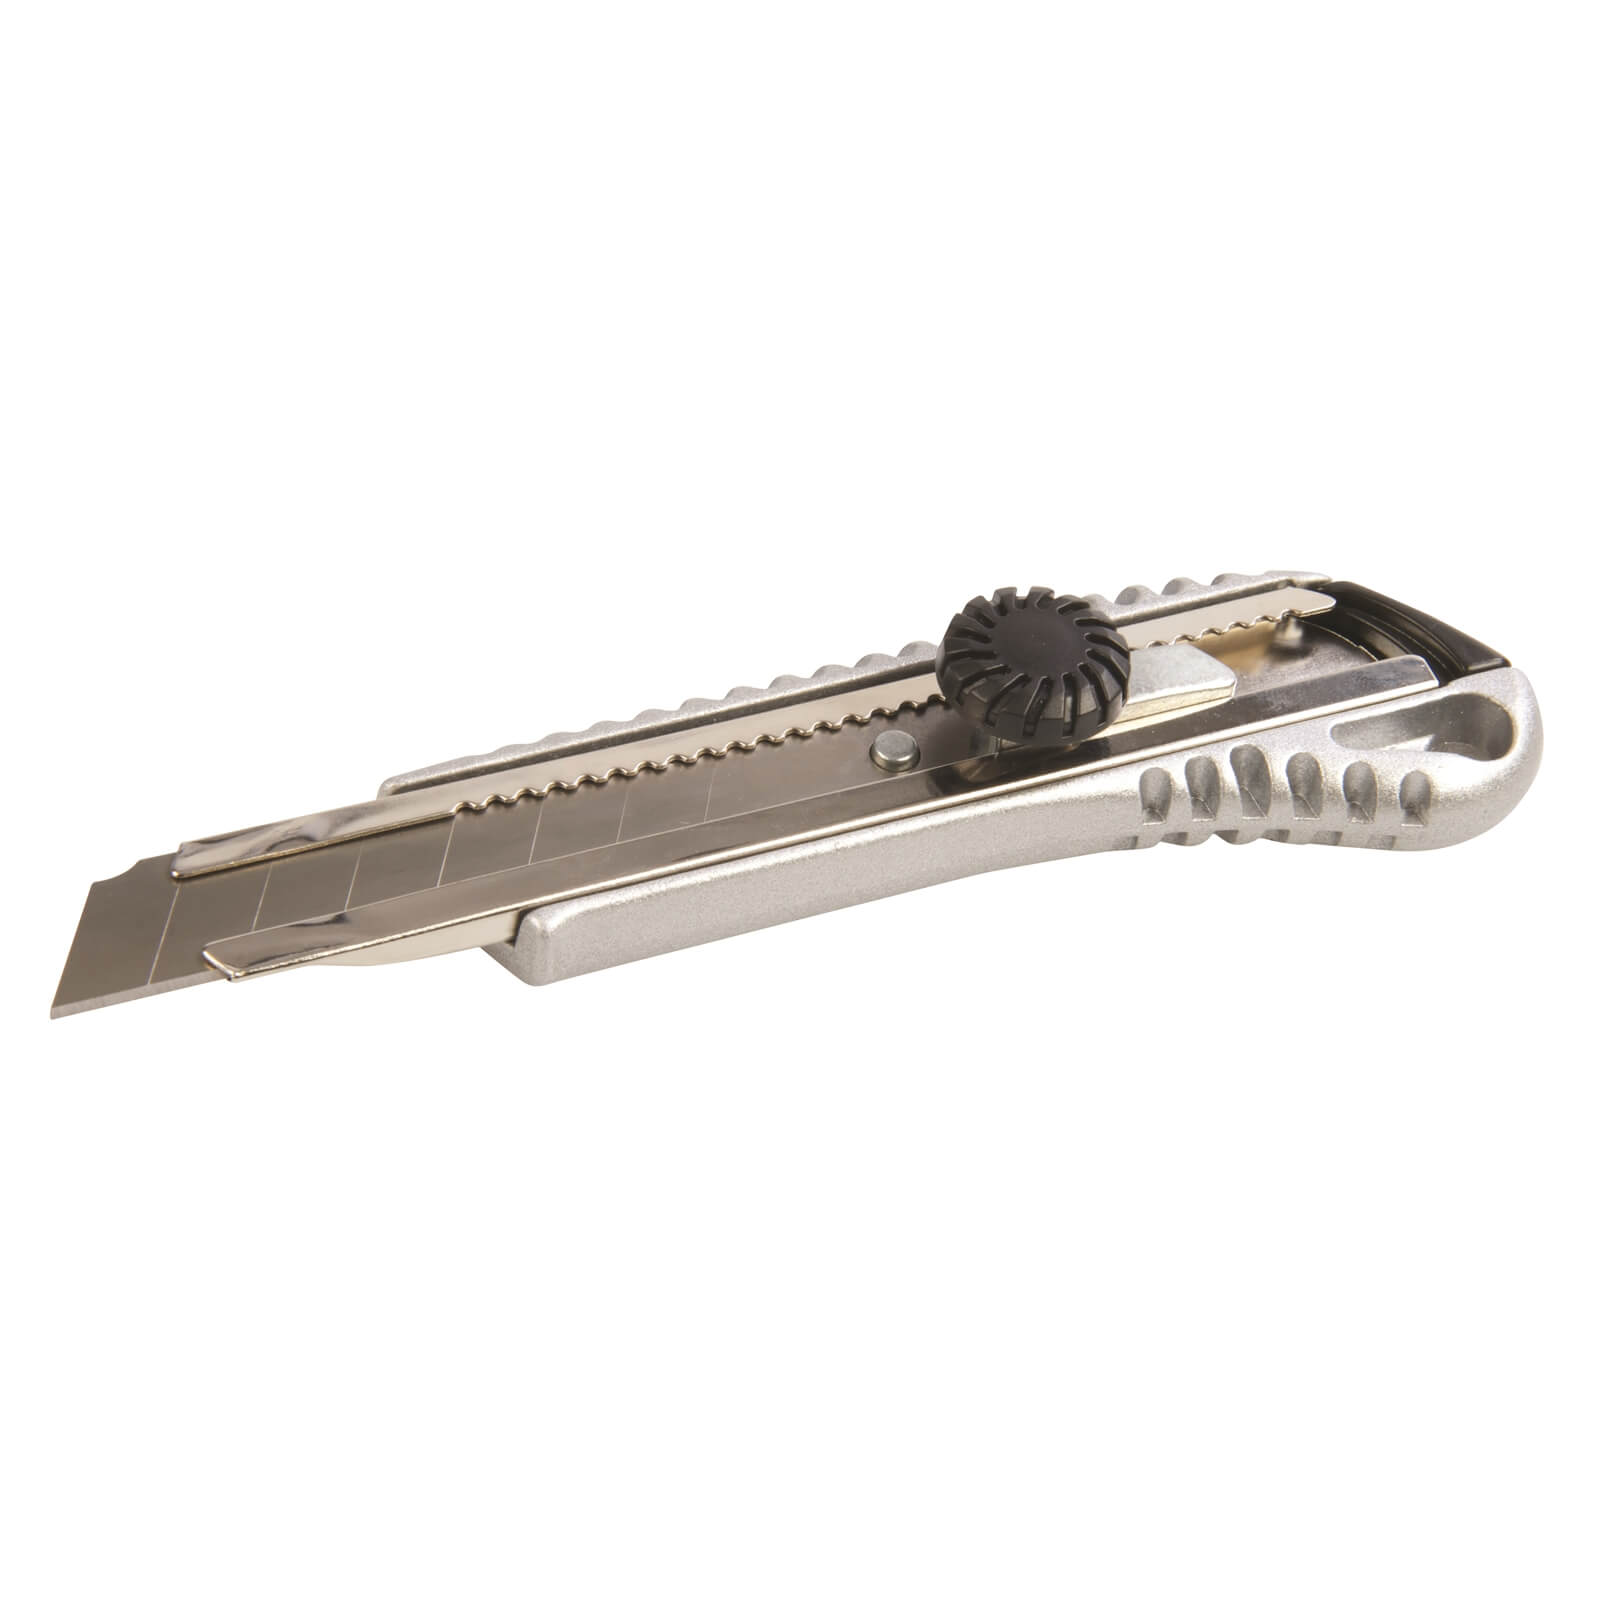 Photo of Silverline Metal Snap-off Knife 18mm